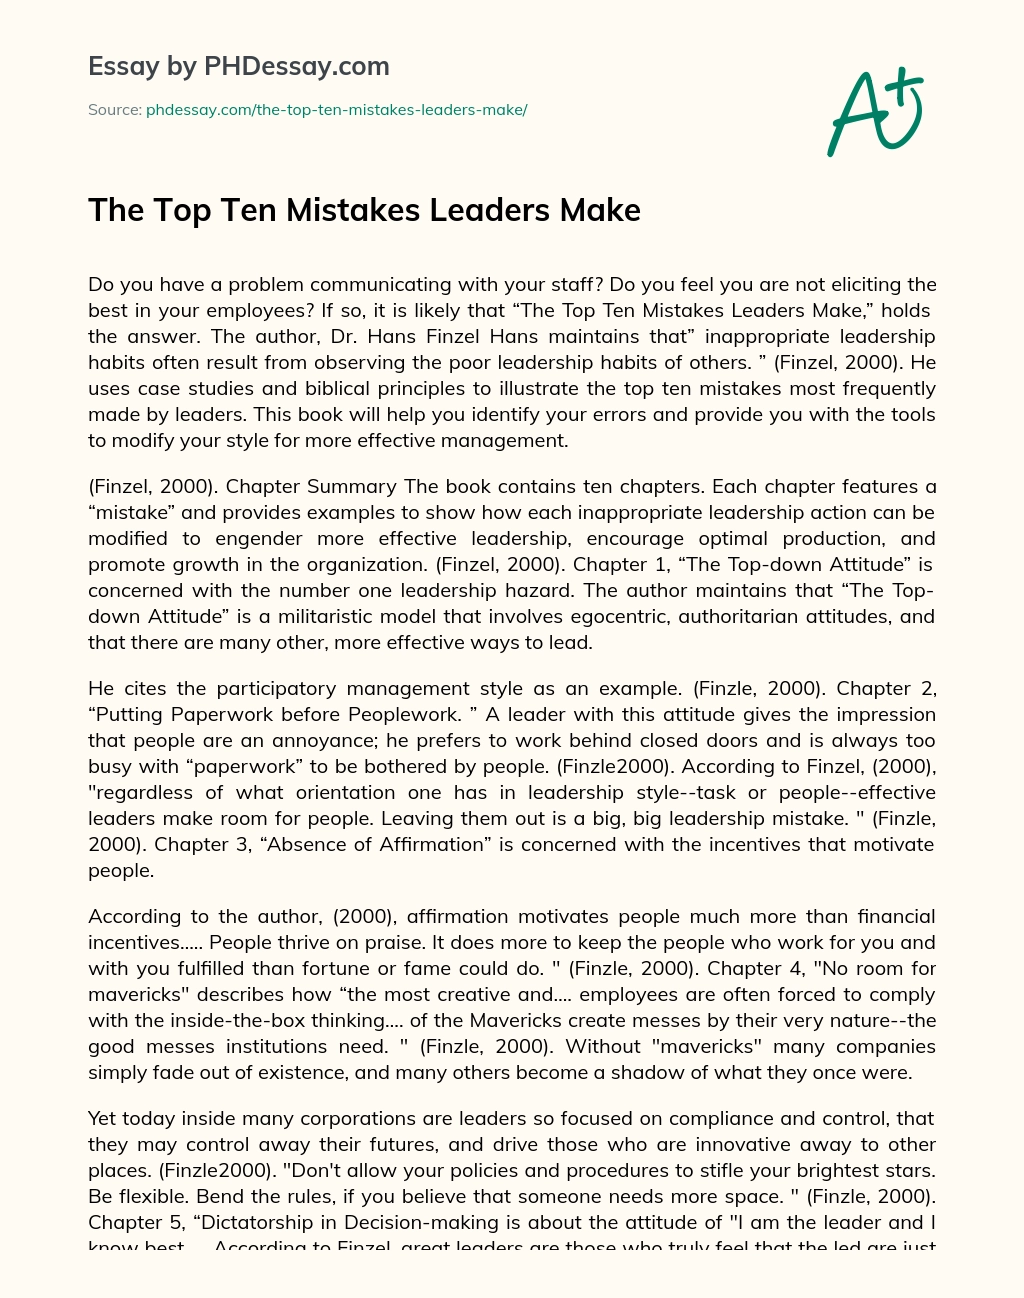 The Top Ten Mistakes Leaders Make essay